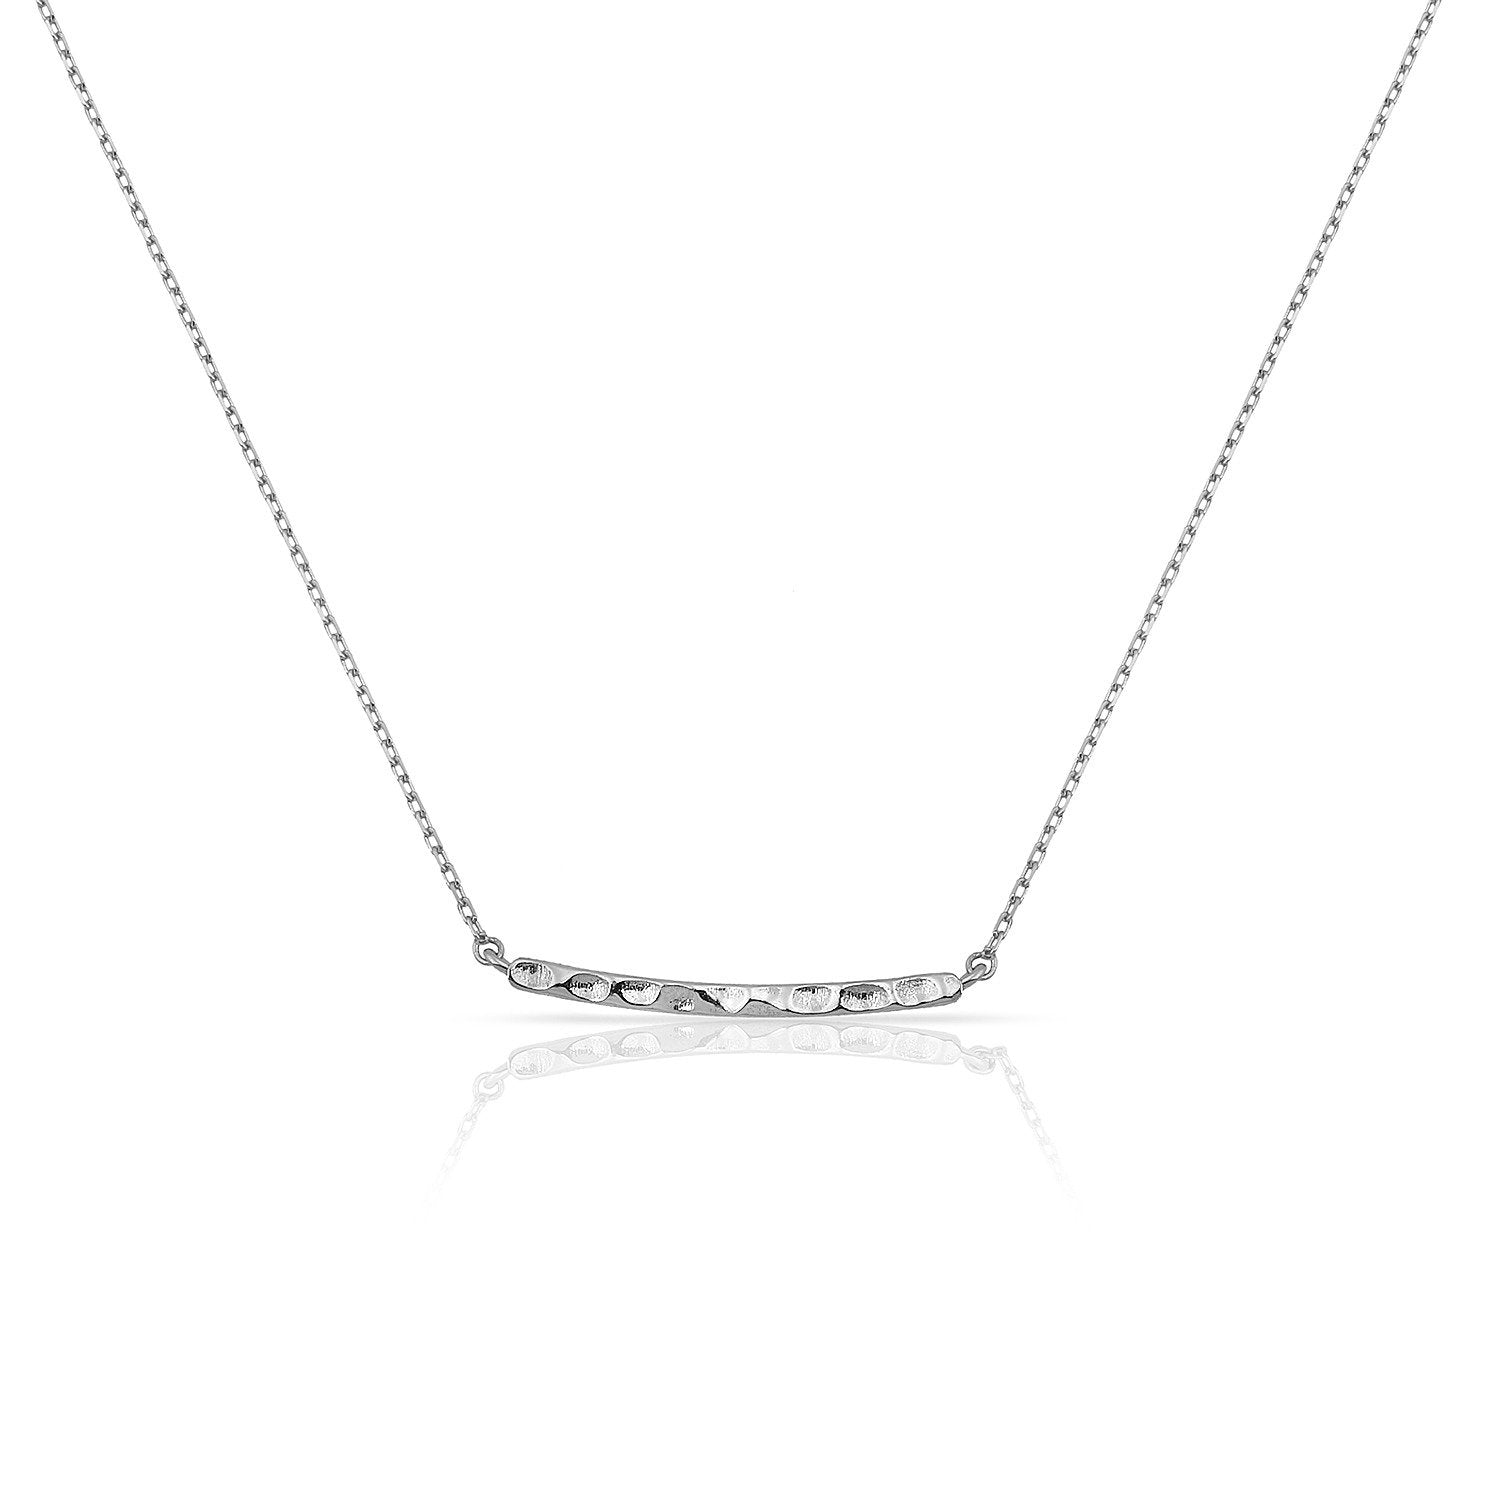 TSK Loverly Hammered Gold Bar Necklace JEWELRY The Sis Kiss 14k White Gold